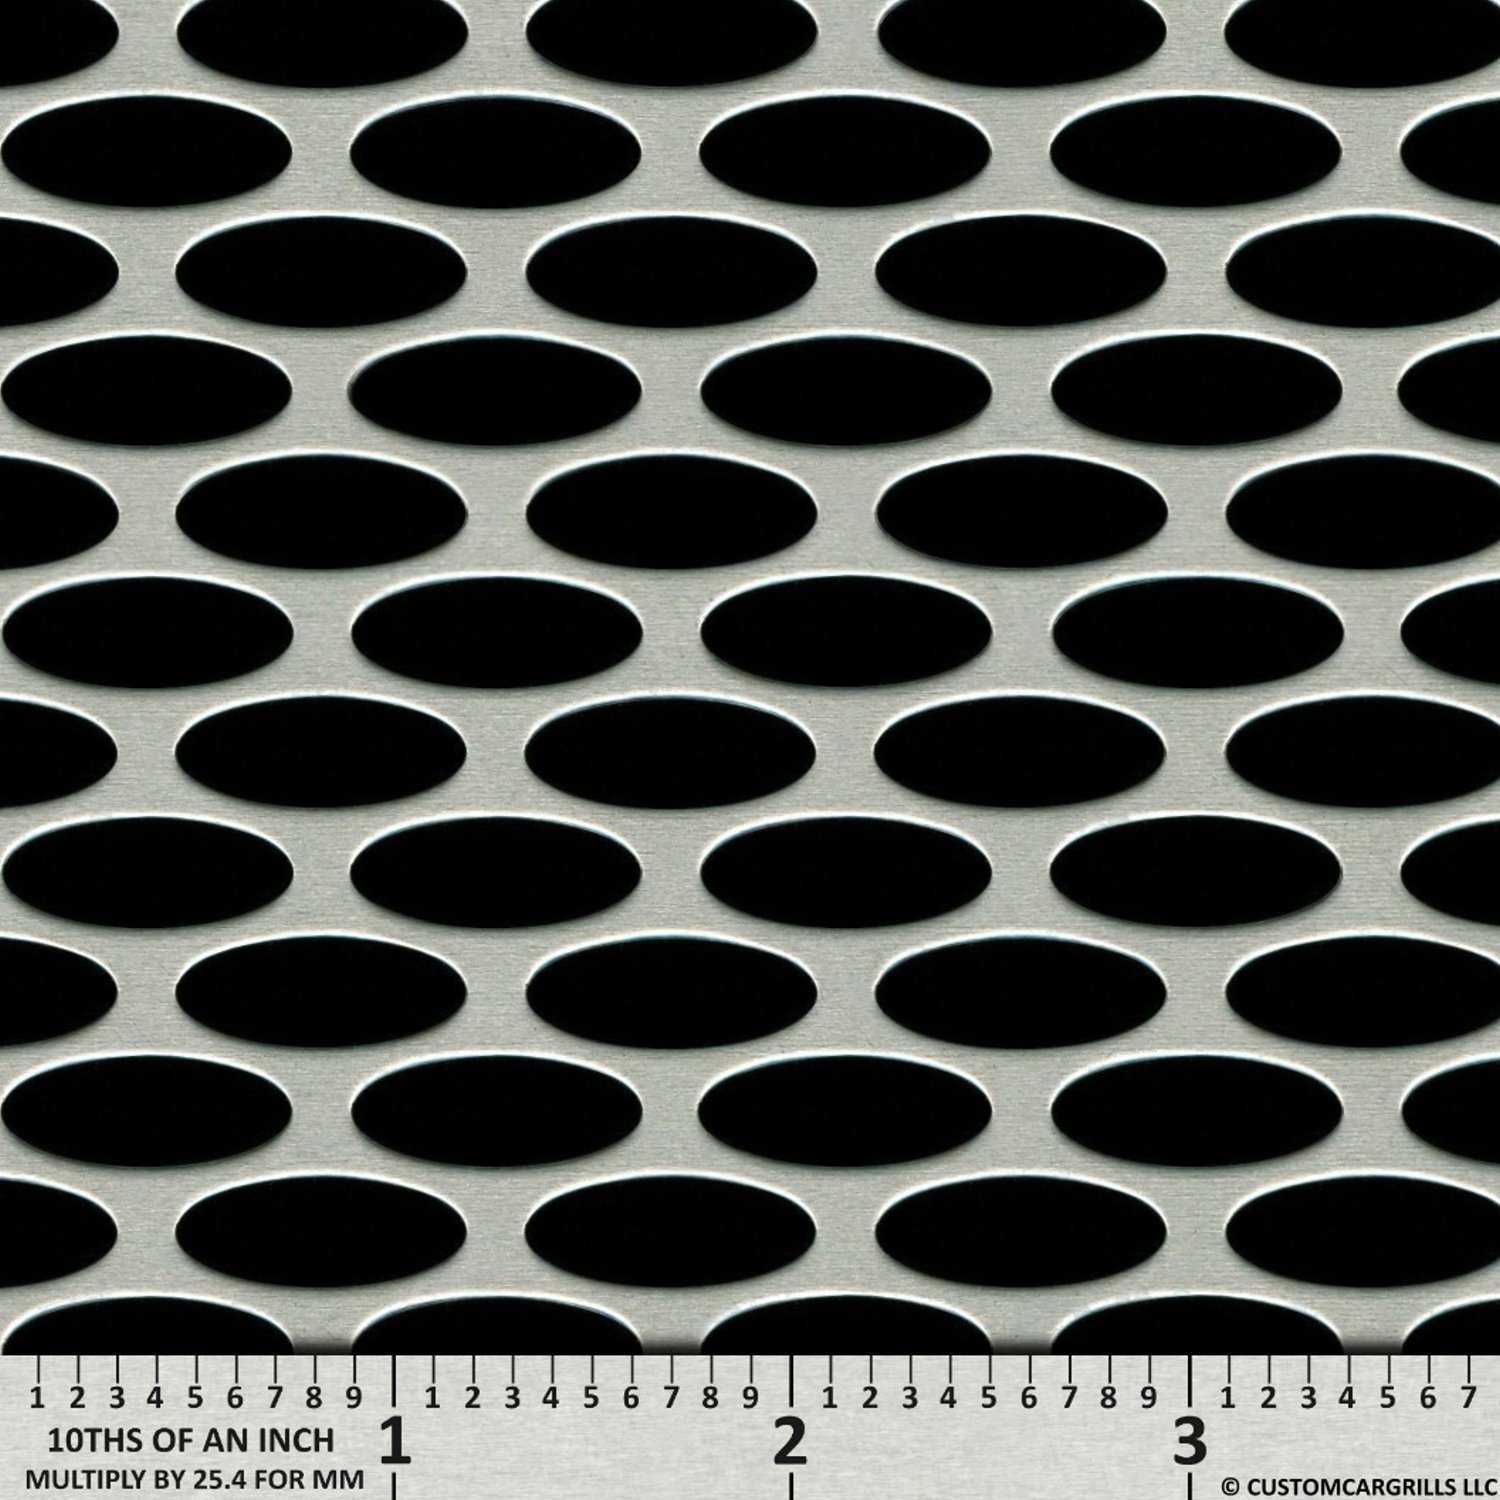 16in. x 48in. "Halo" Aluminum Grill Mesh Sheet - Silver